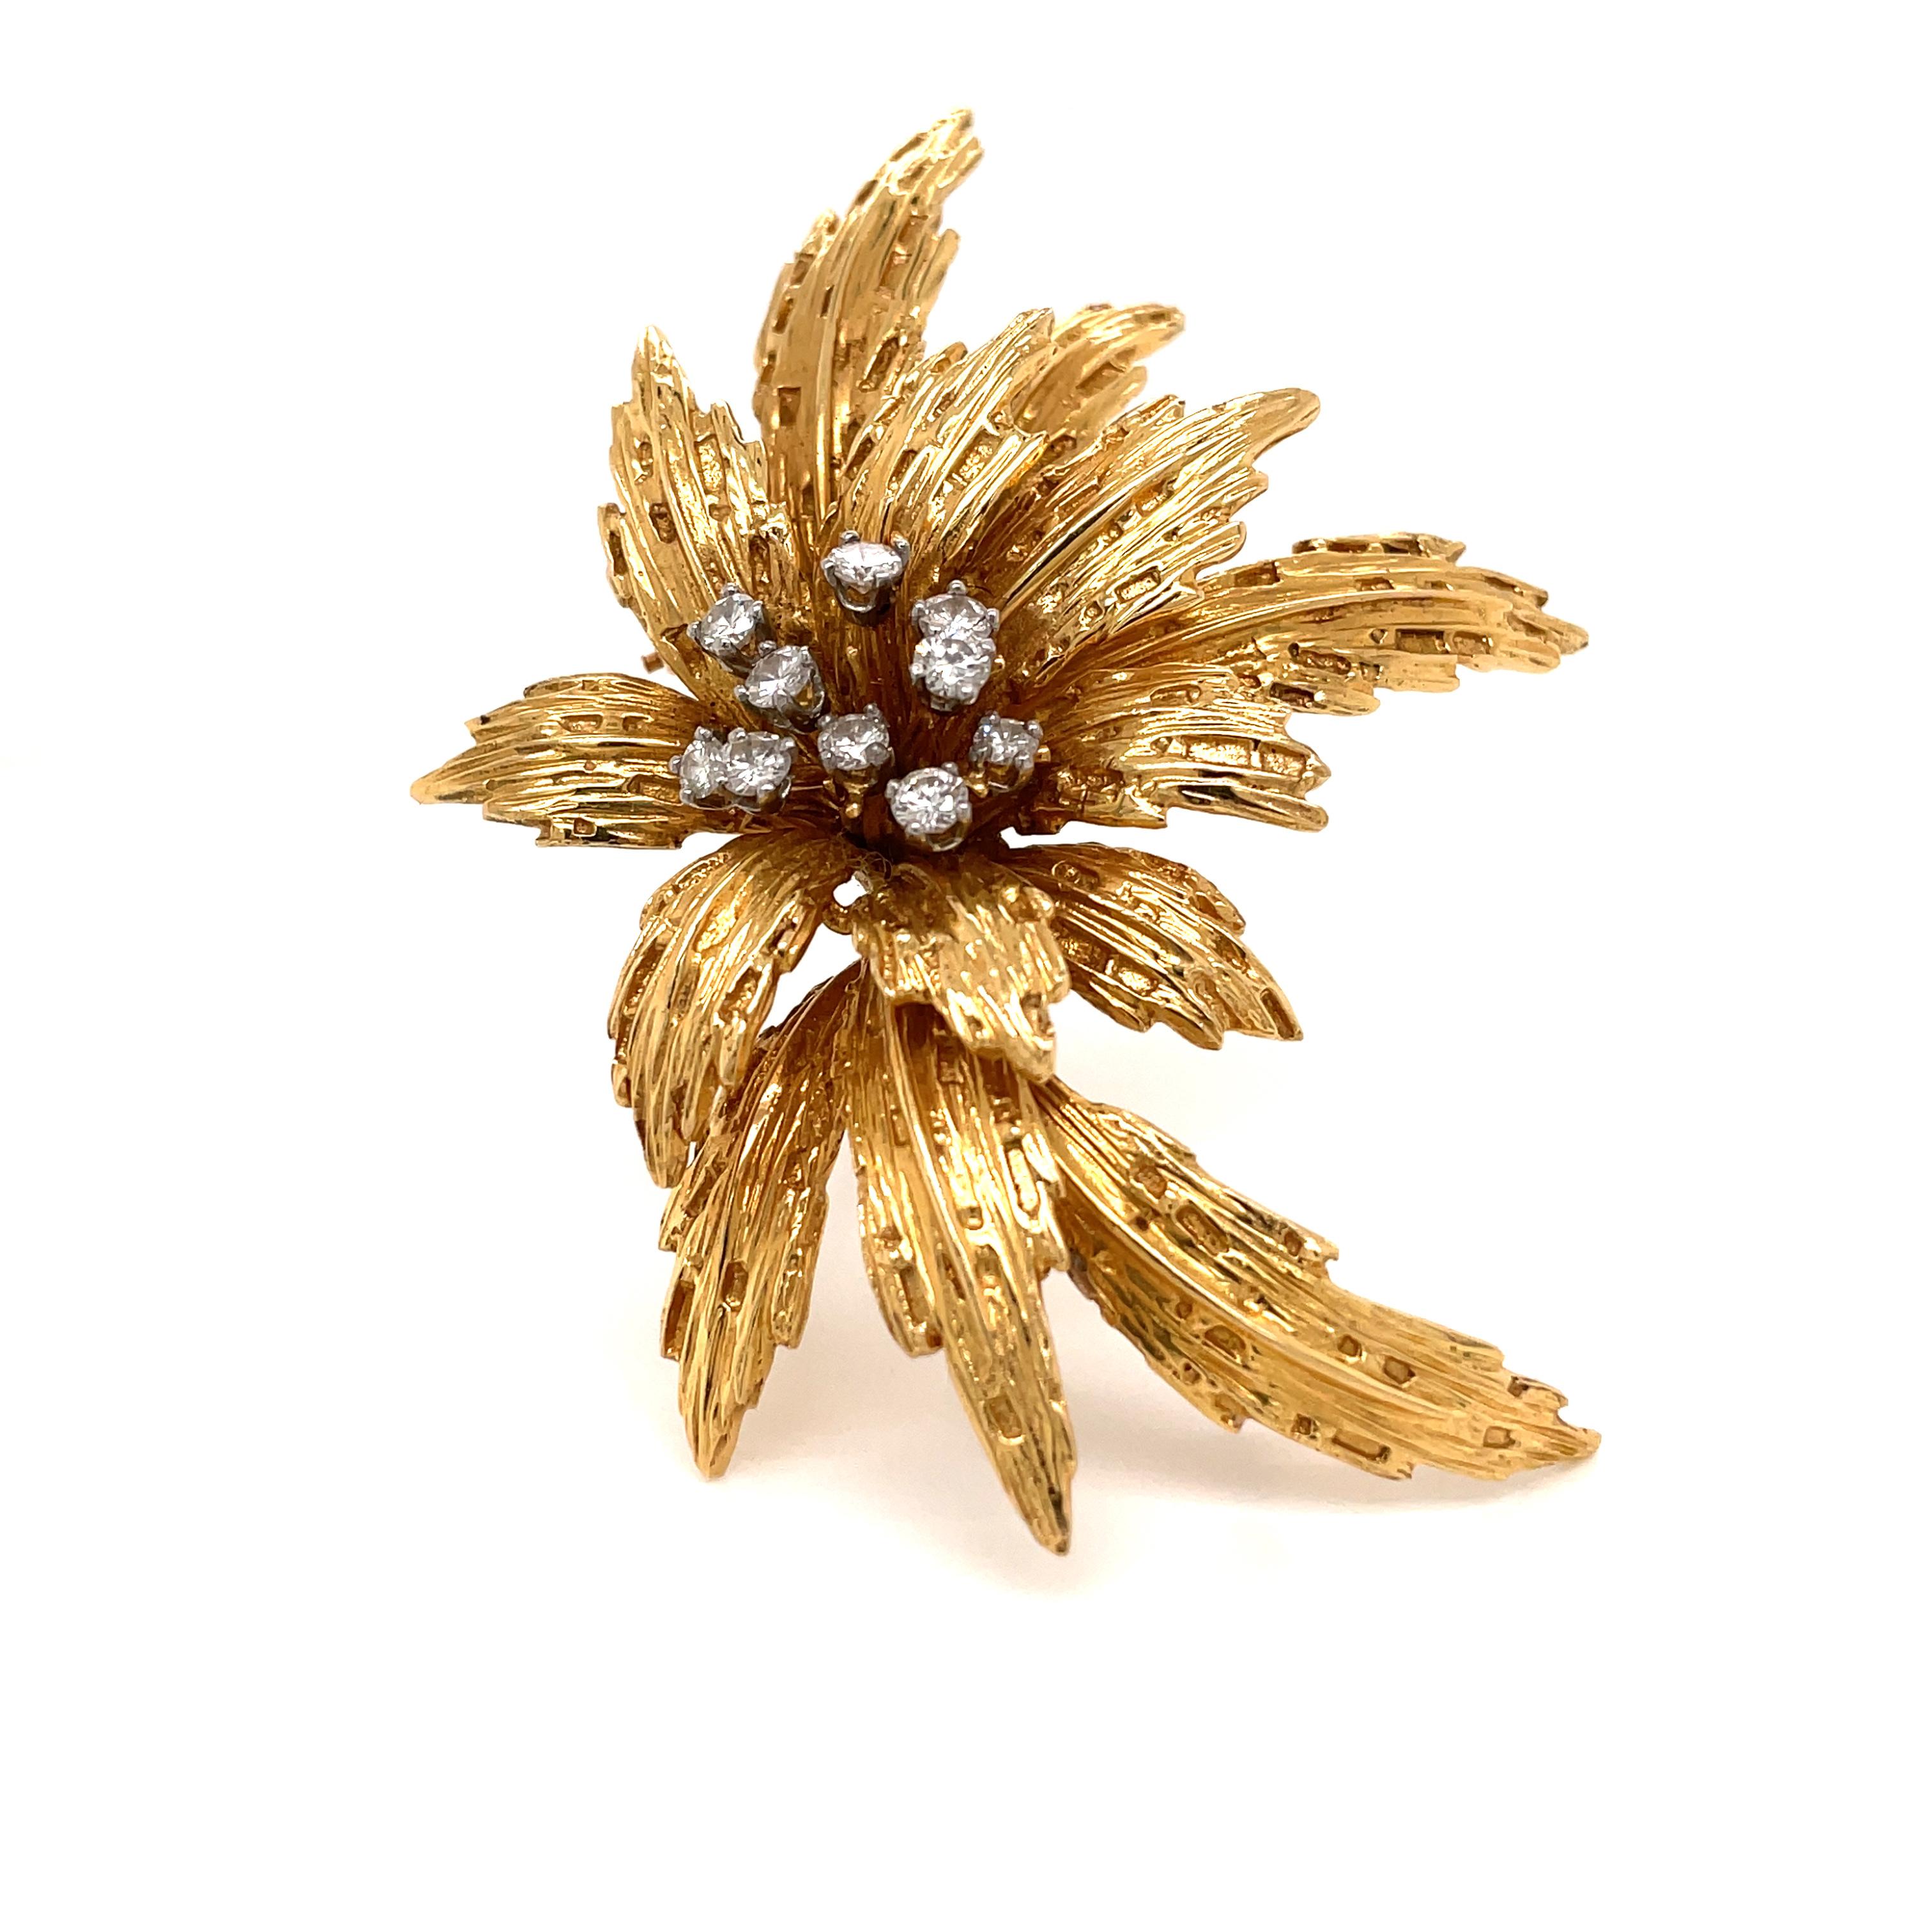 A fabulous 1960's floral motif brooch set with approx. 1.50 total ct of round cut diamonds.
Handmade 18k gold mounting;  This piece is designed and crafted entirely by hand in the traditional way, using age old techniques and processes. Signed and